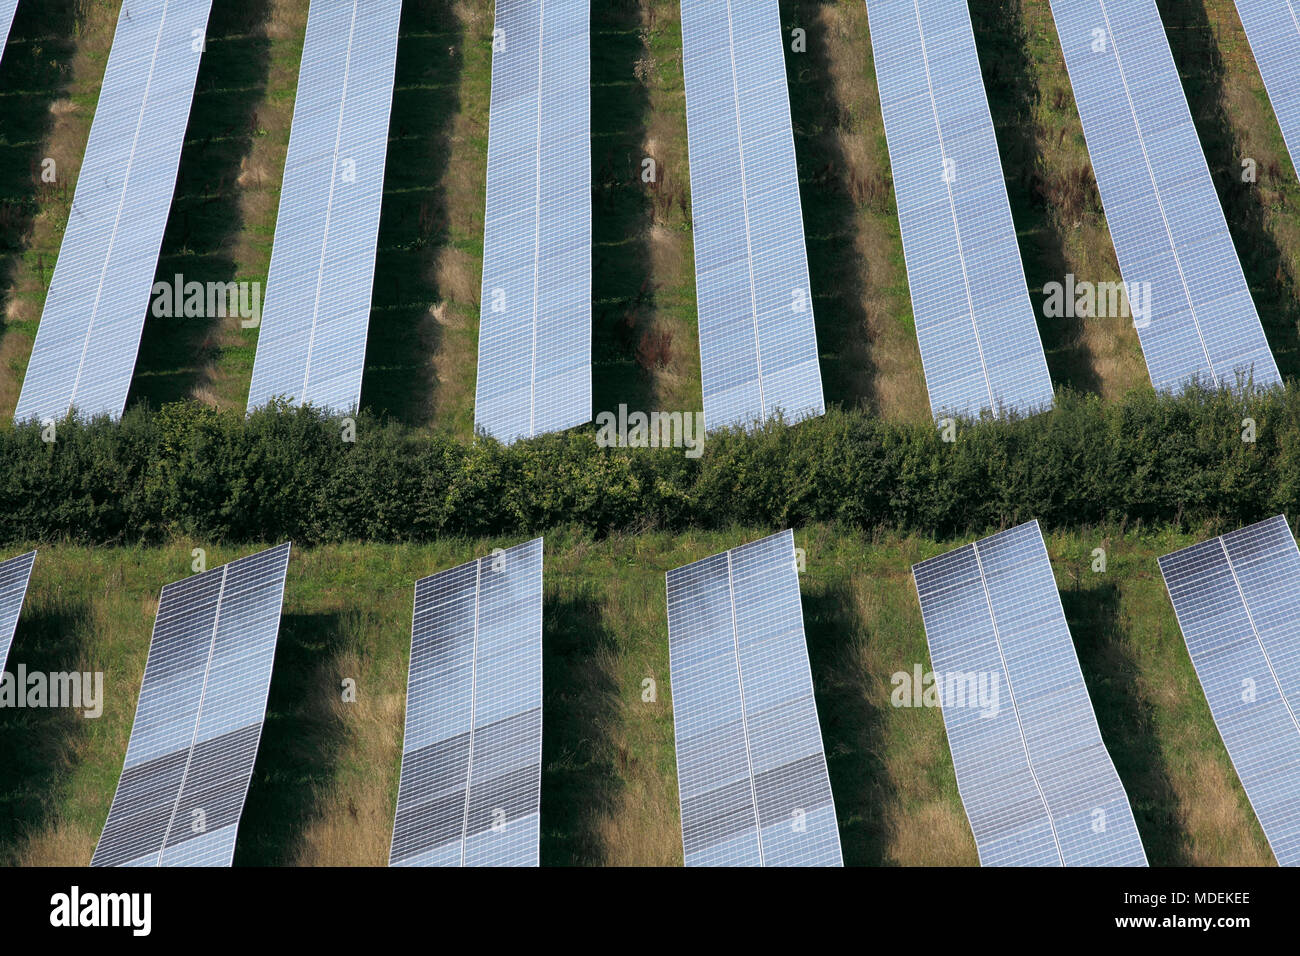 Looking down on some of the photovoltaic arrays that comprise the Milborne Port Solar Farm, near Milborne Port, Somerset. Stock Photo